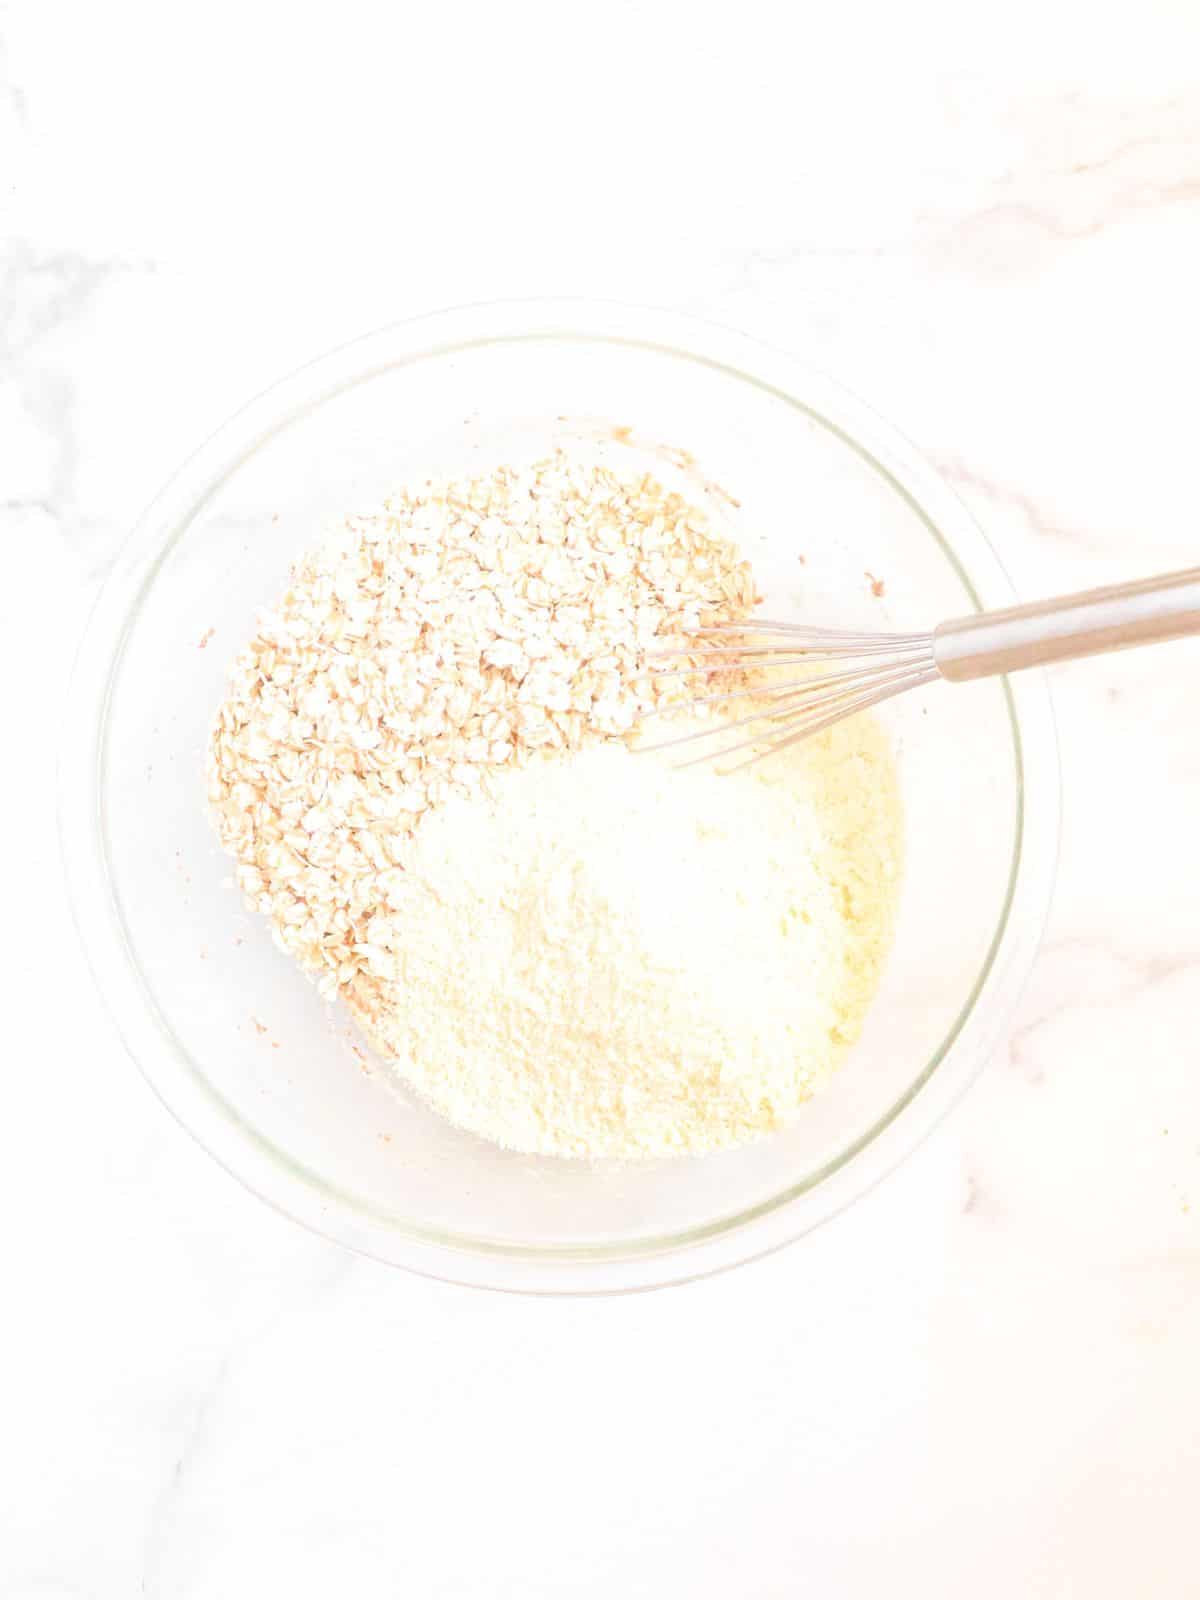 oatmeal and gluten-free flour in bowl